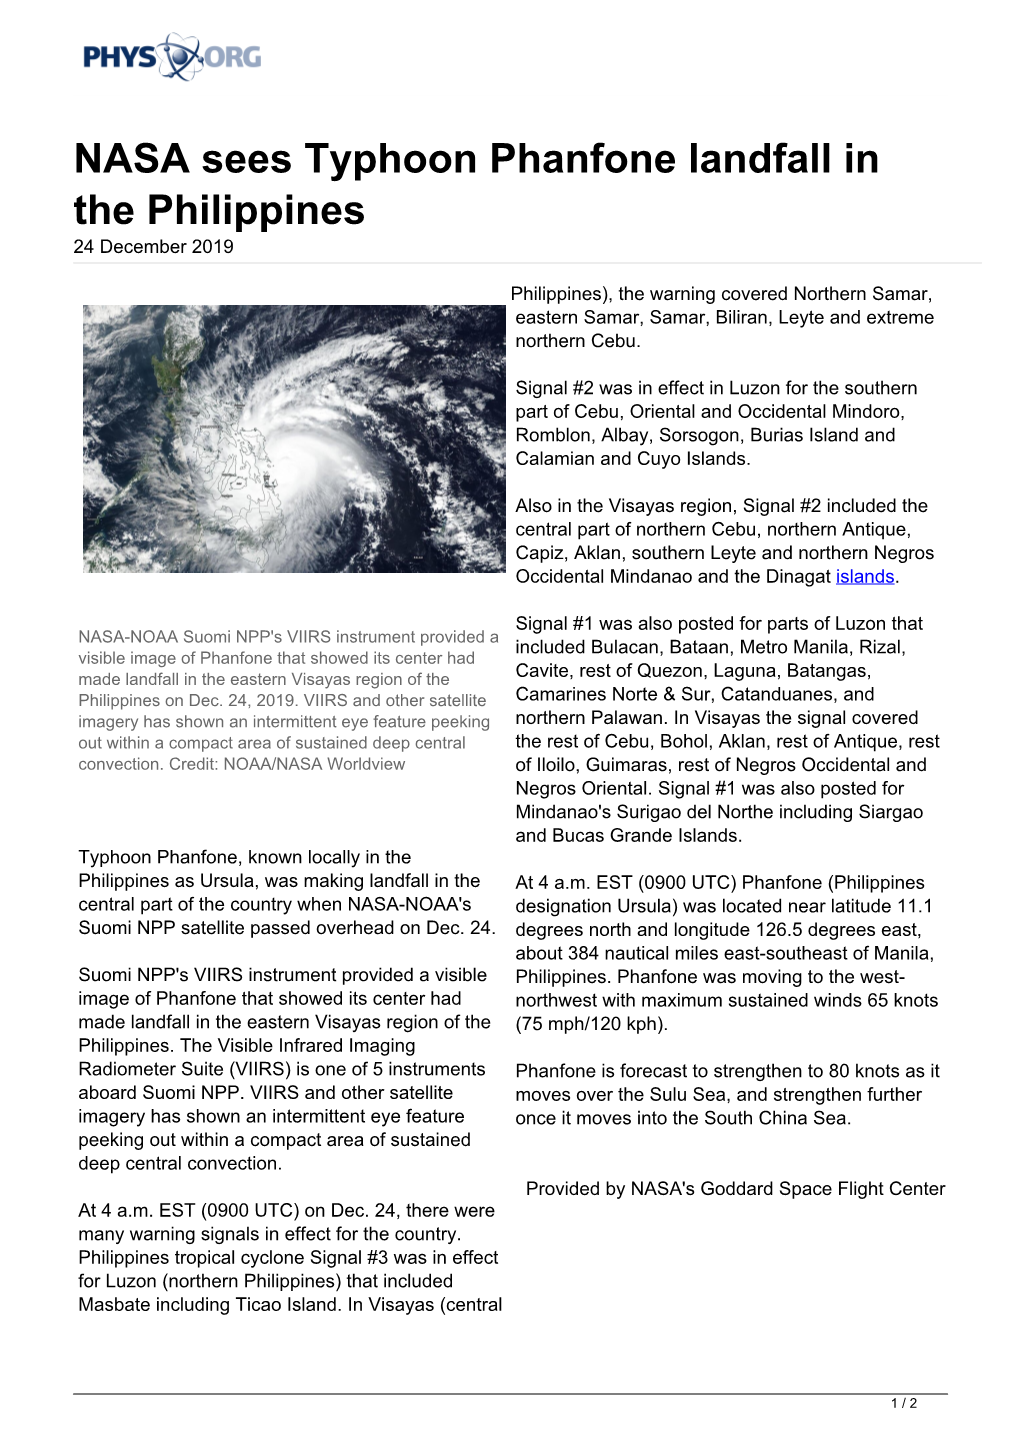 NASA Sees Typhoon Phanfone Landfall in the Philippines 24 December 2019